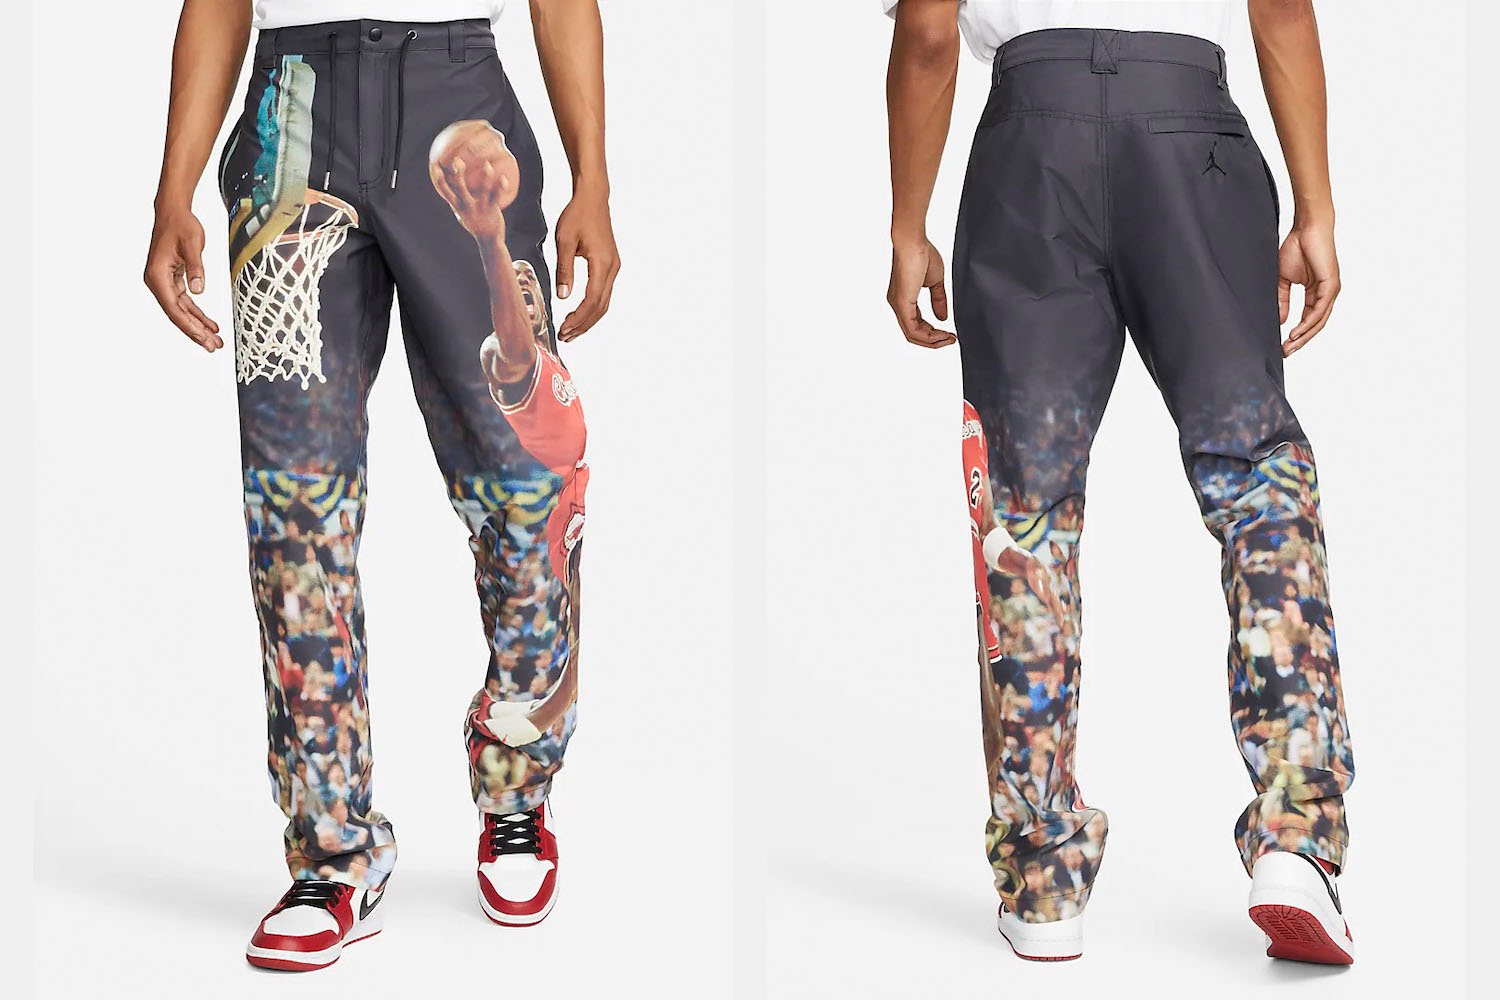 Two model shots of a model in a pair of navy twill graphic Nike Jordan pants with an image on Michael Jordan on a white background